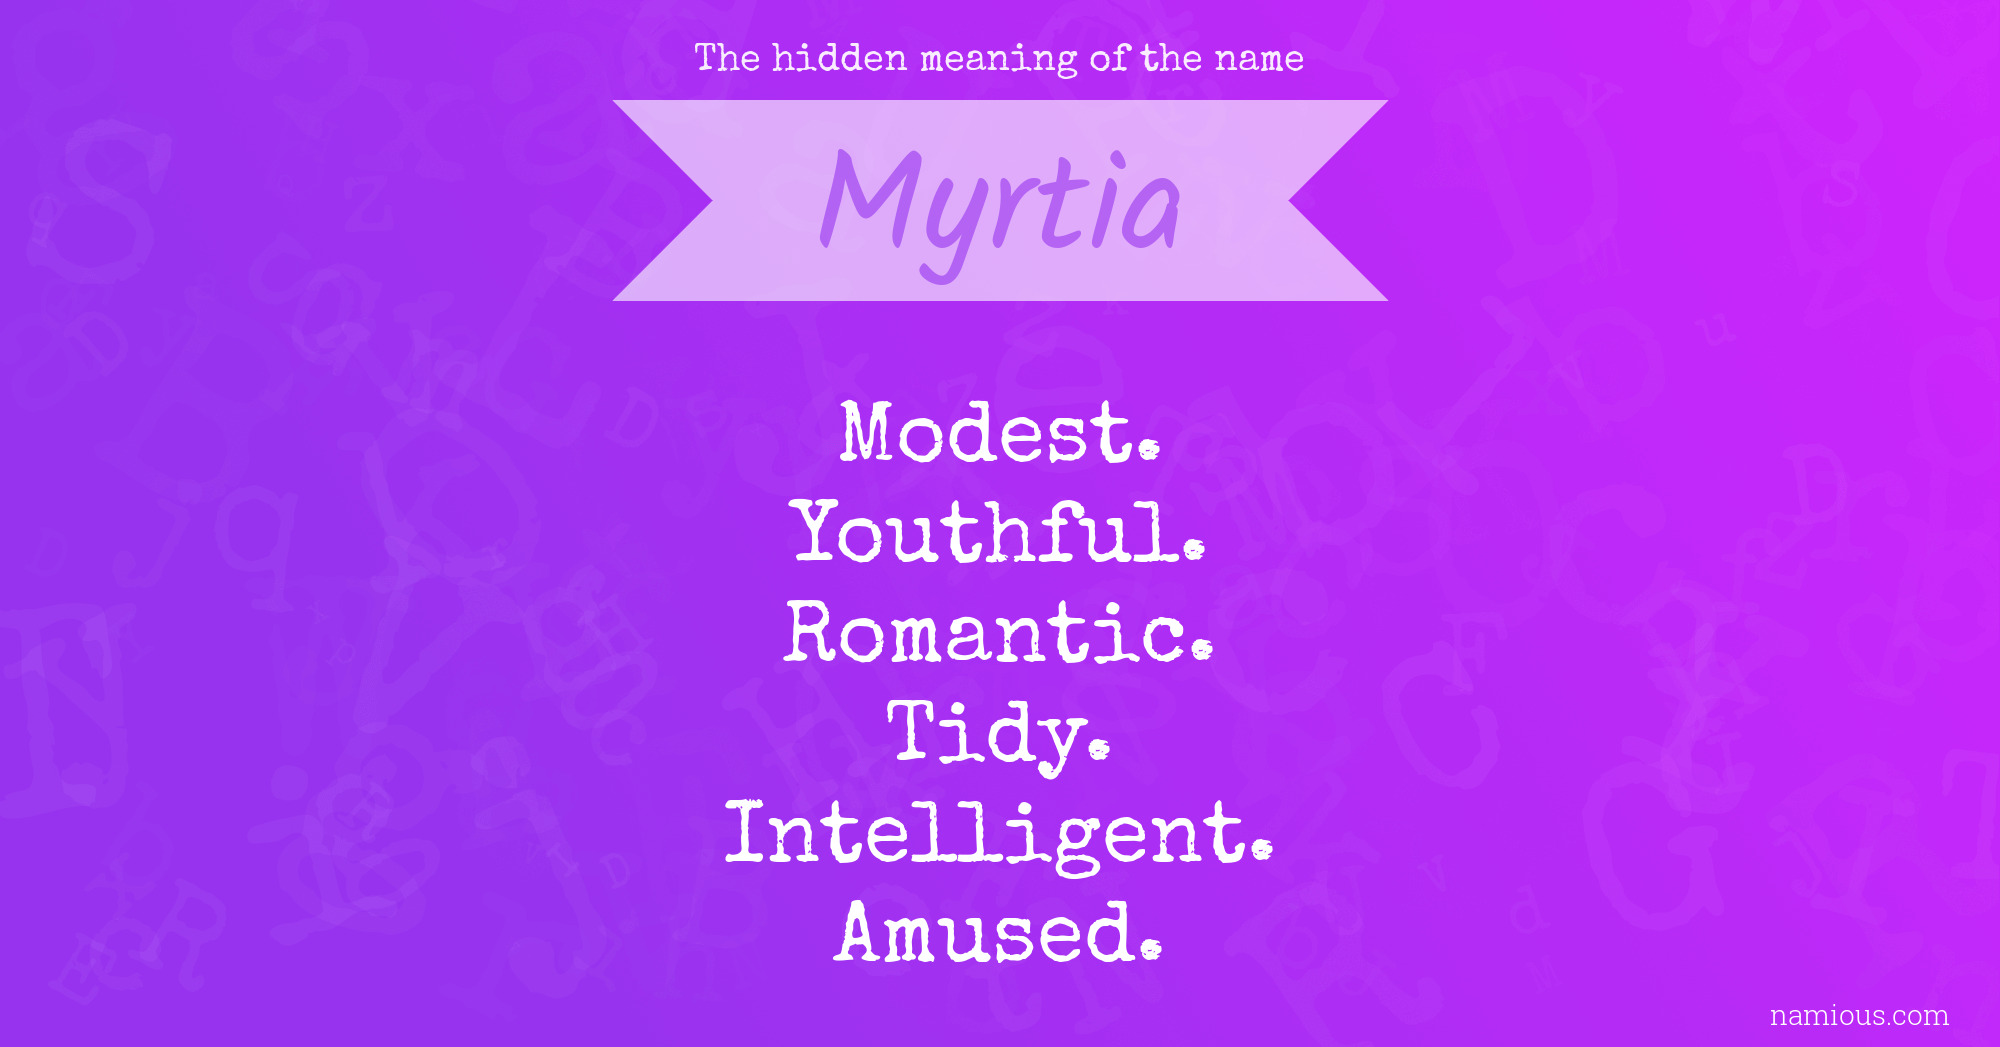 The hidden meaning of the name Myrtia